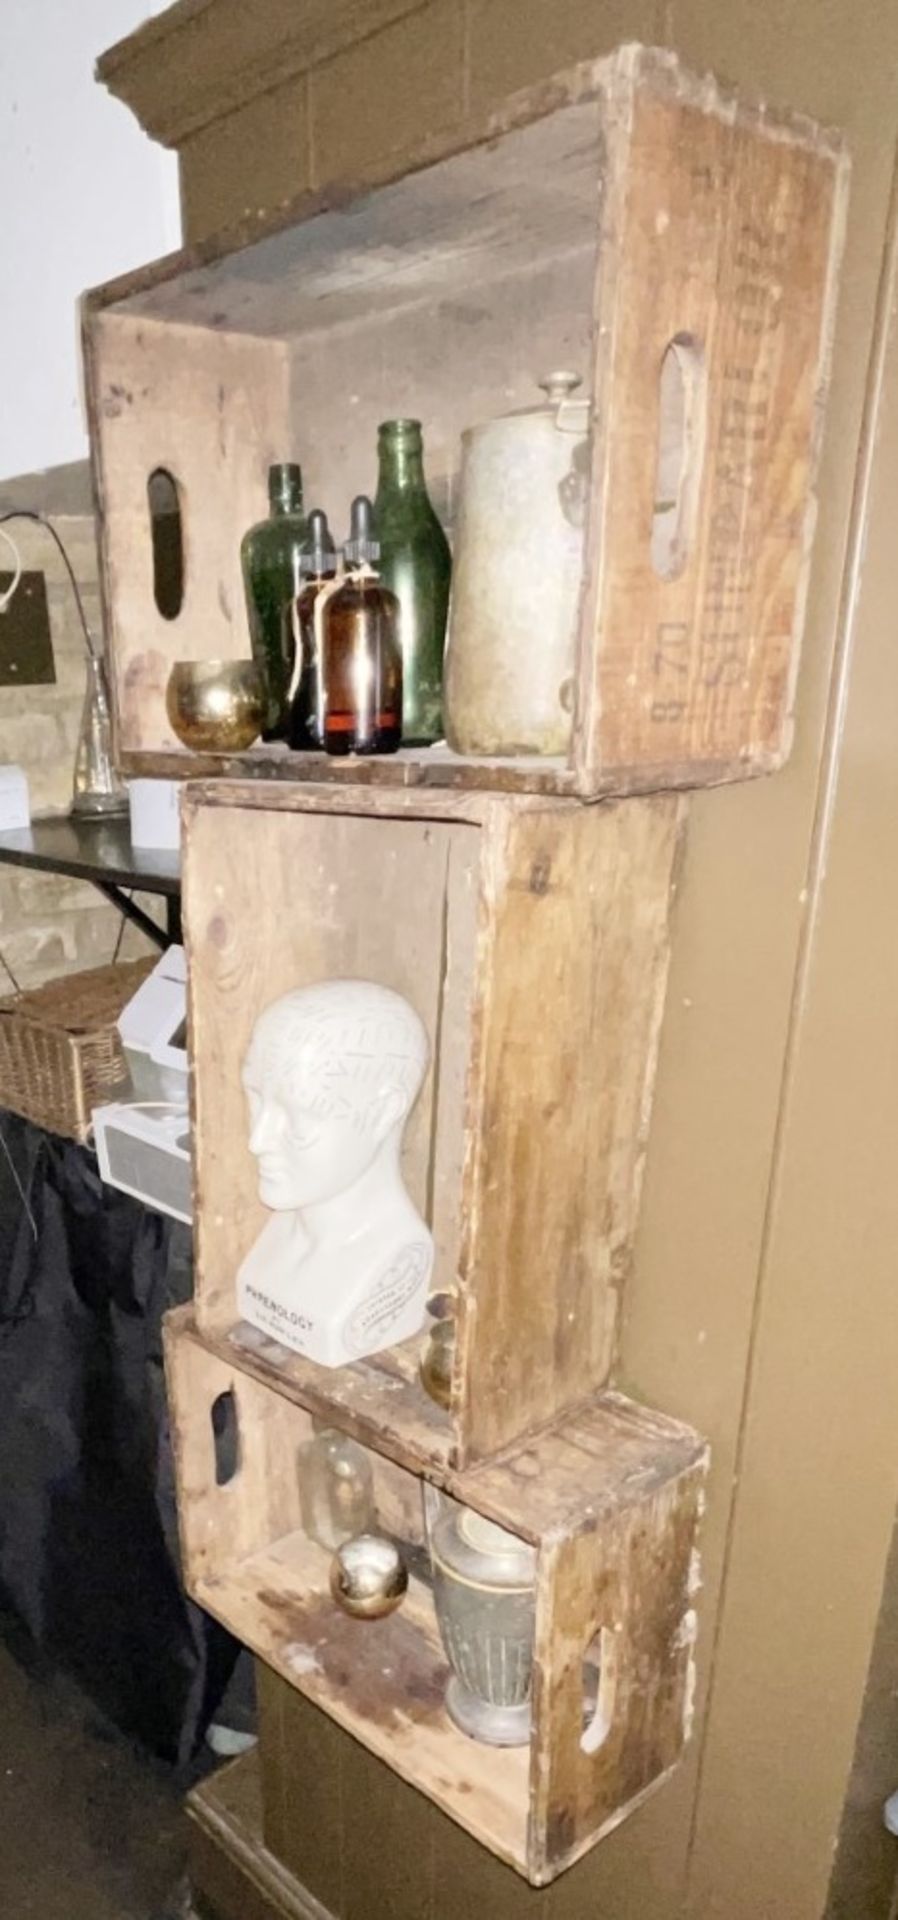 3 x Ford Branded Wall Mounted Soap Boxes and Vintage Contents Within Including Phrenology Bust - Bild 6 aus 6